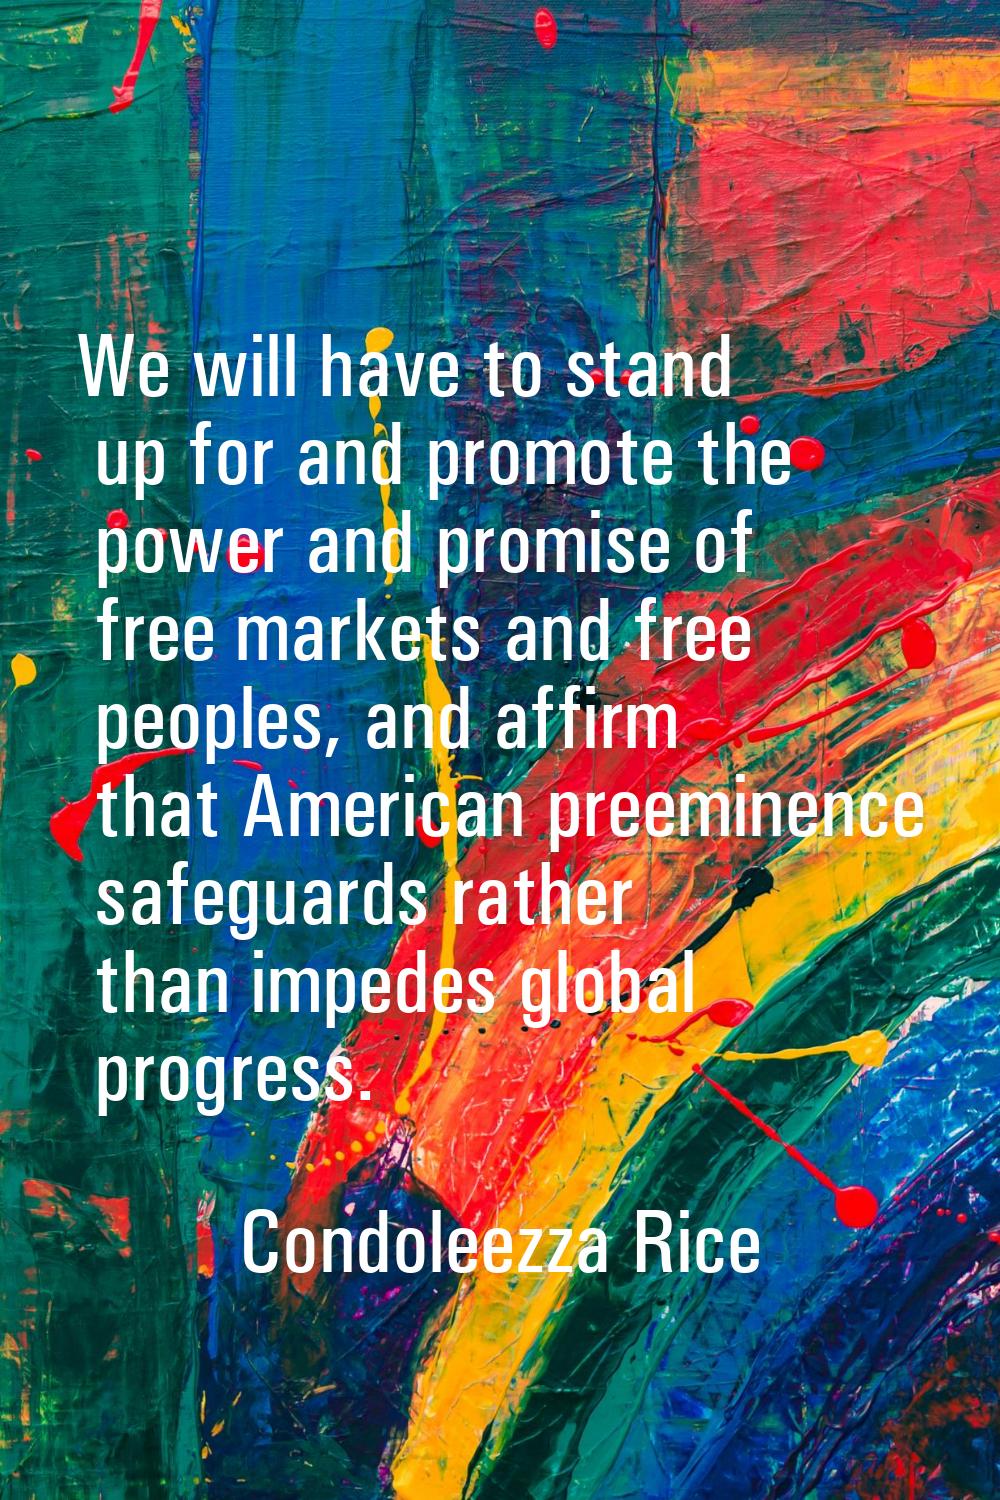 We will have to stand up for and promote the power and promise of free markets and free peoples, an